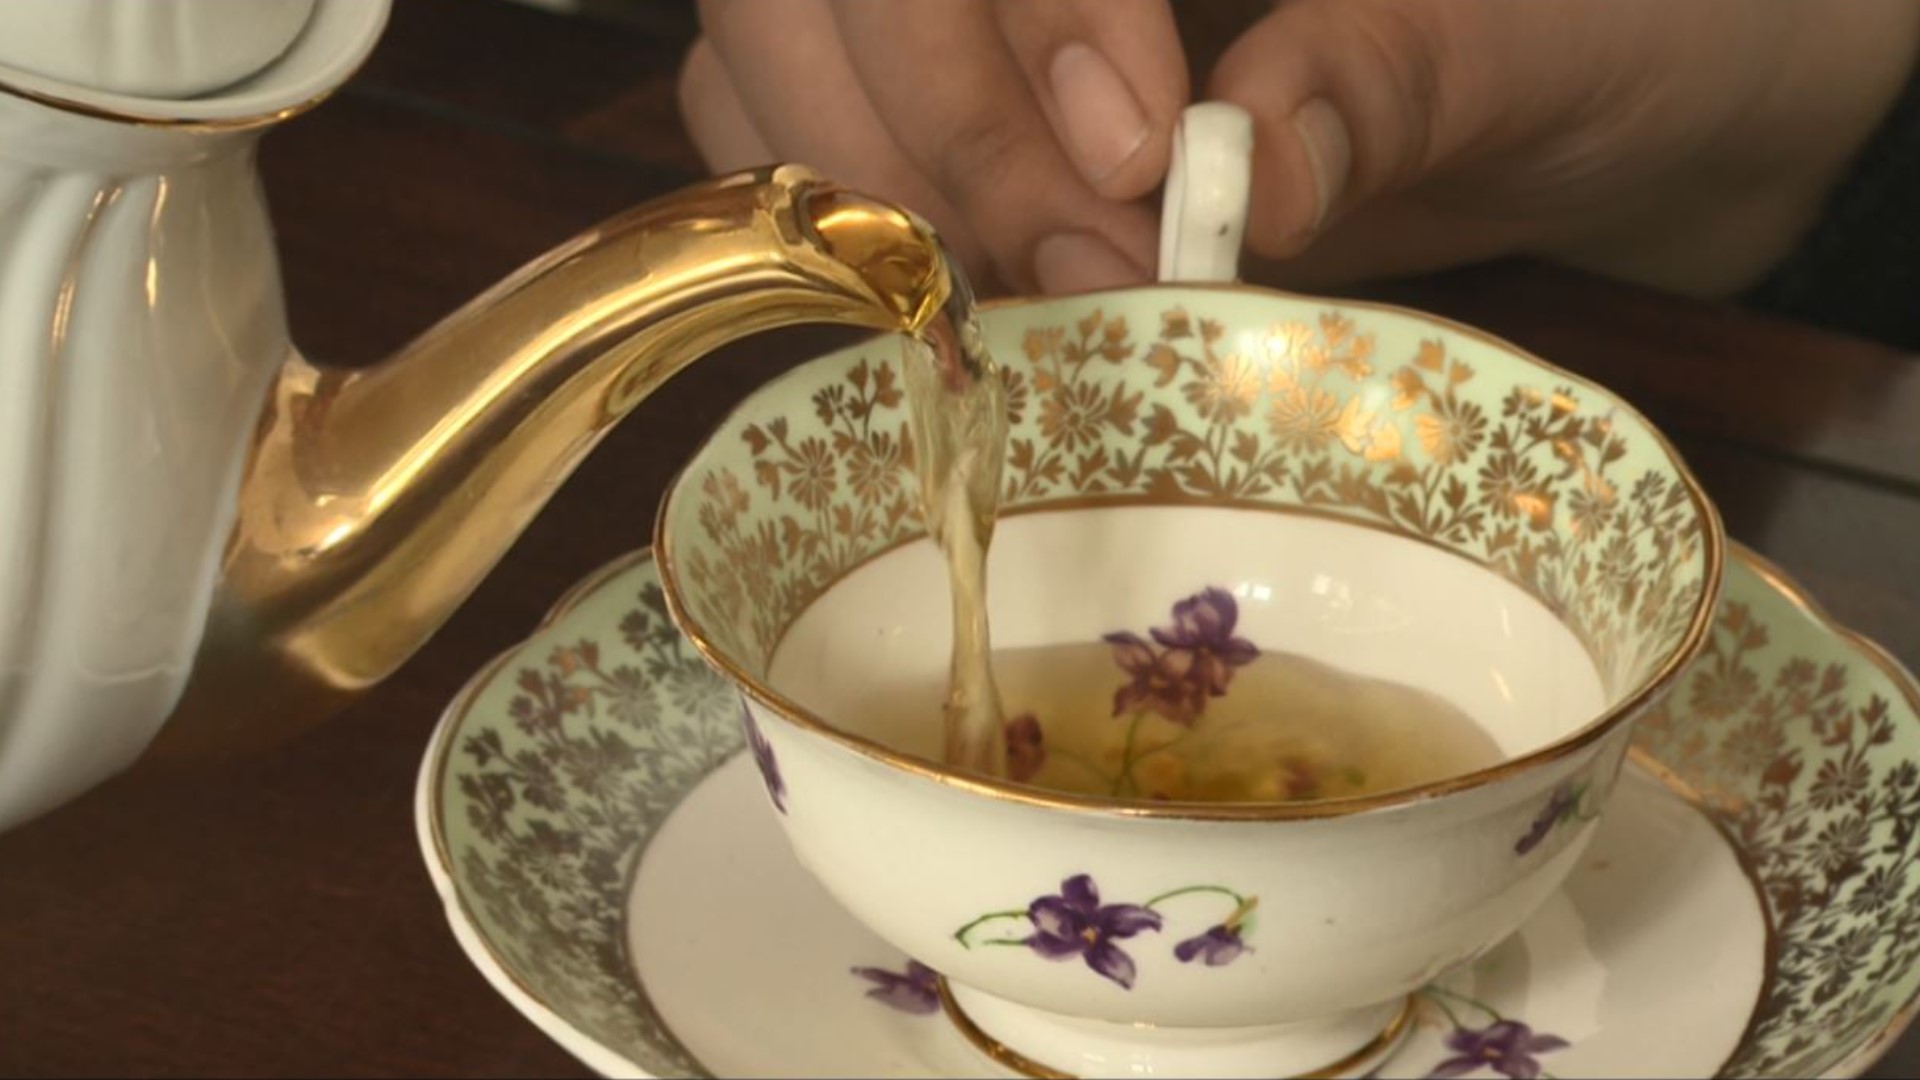 Lola's Traveling Tea Party in Seattle delivers English or Filipino-inspired tea boxes to doorsteps. #k5evening